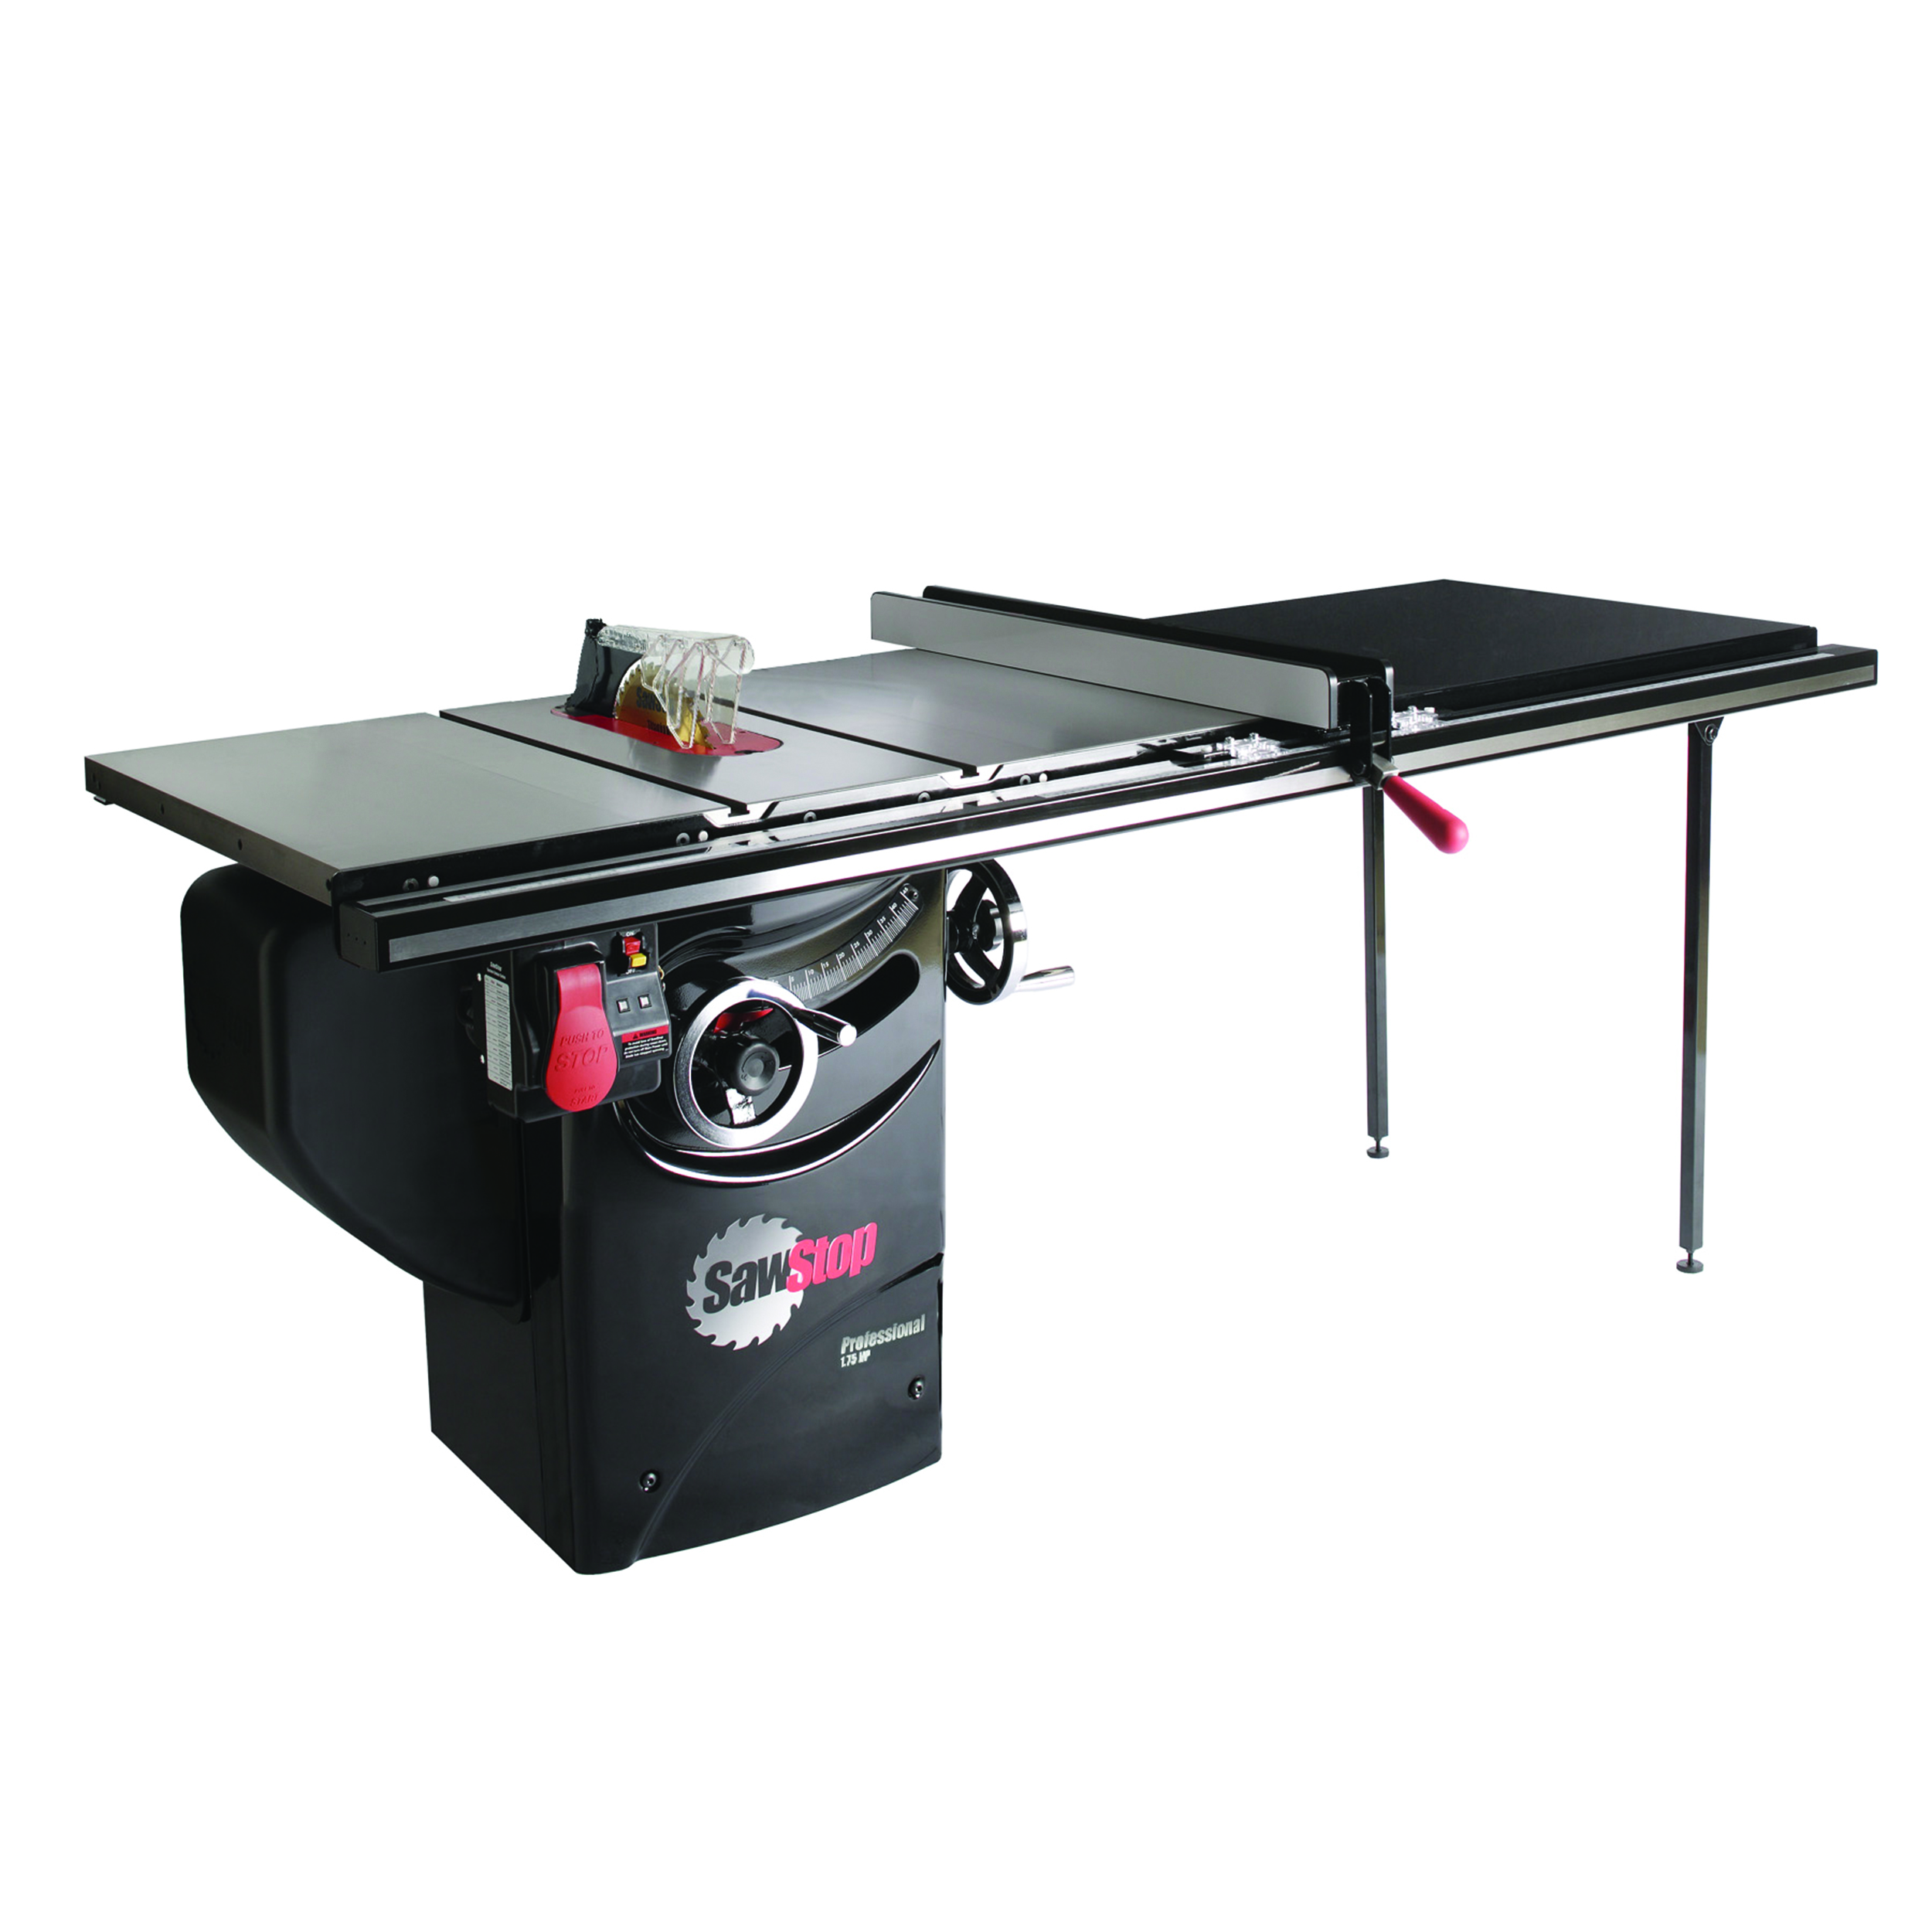 1.75 Hp Professional Cabinet Saw With 52" Professional T-glide Fence System Pcs175-tgp252